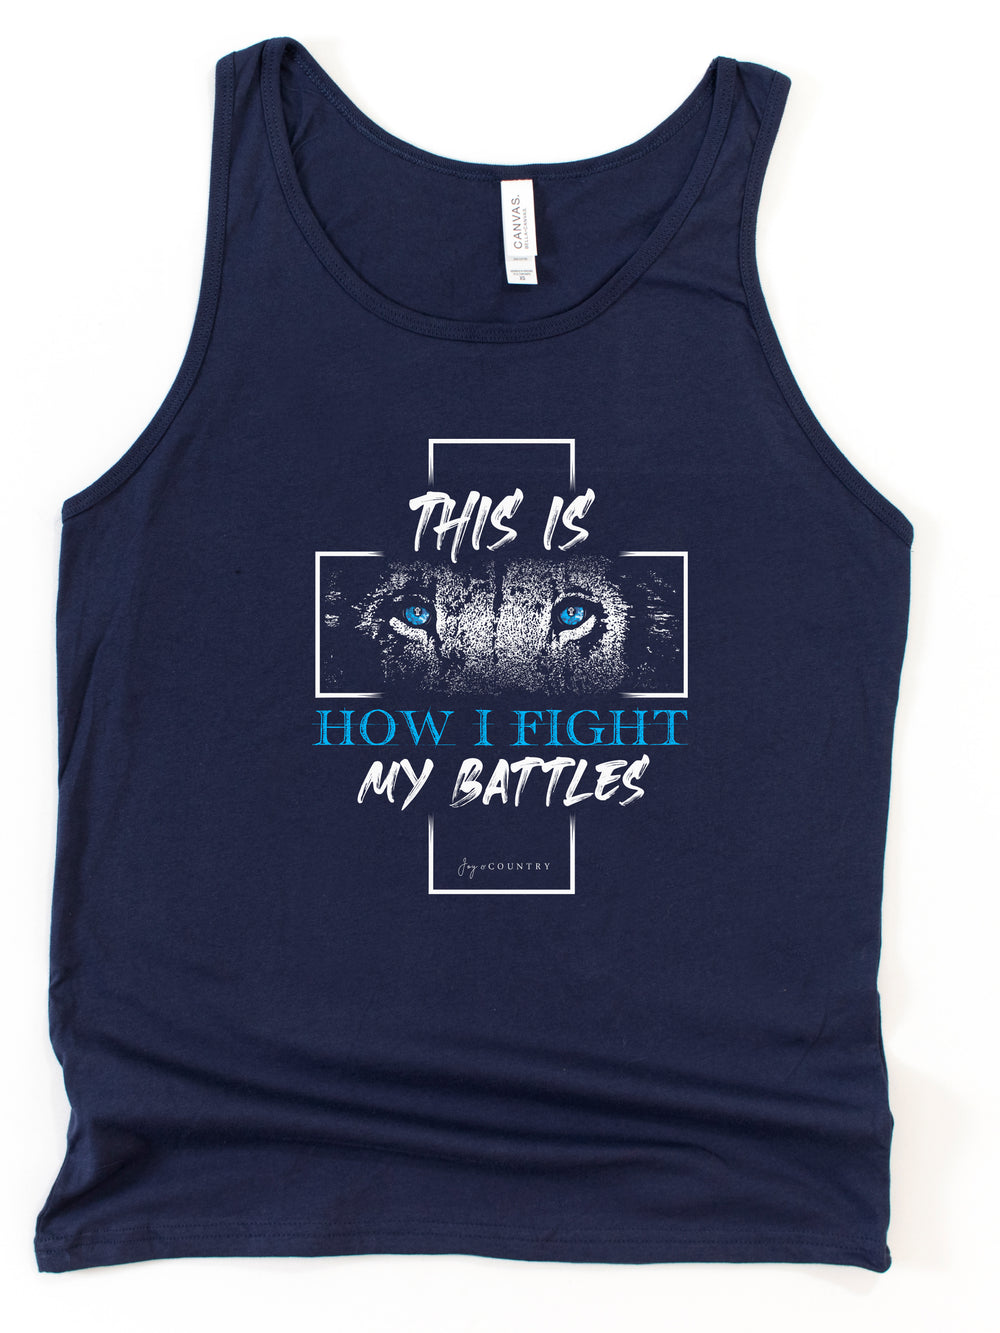 This is How I Fight My Battles - Unisex Jersey Tank Top - Joy & Country